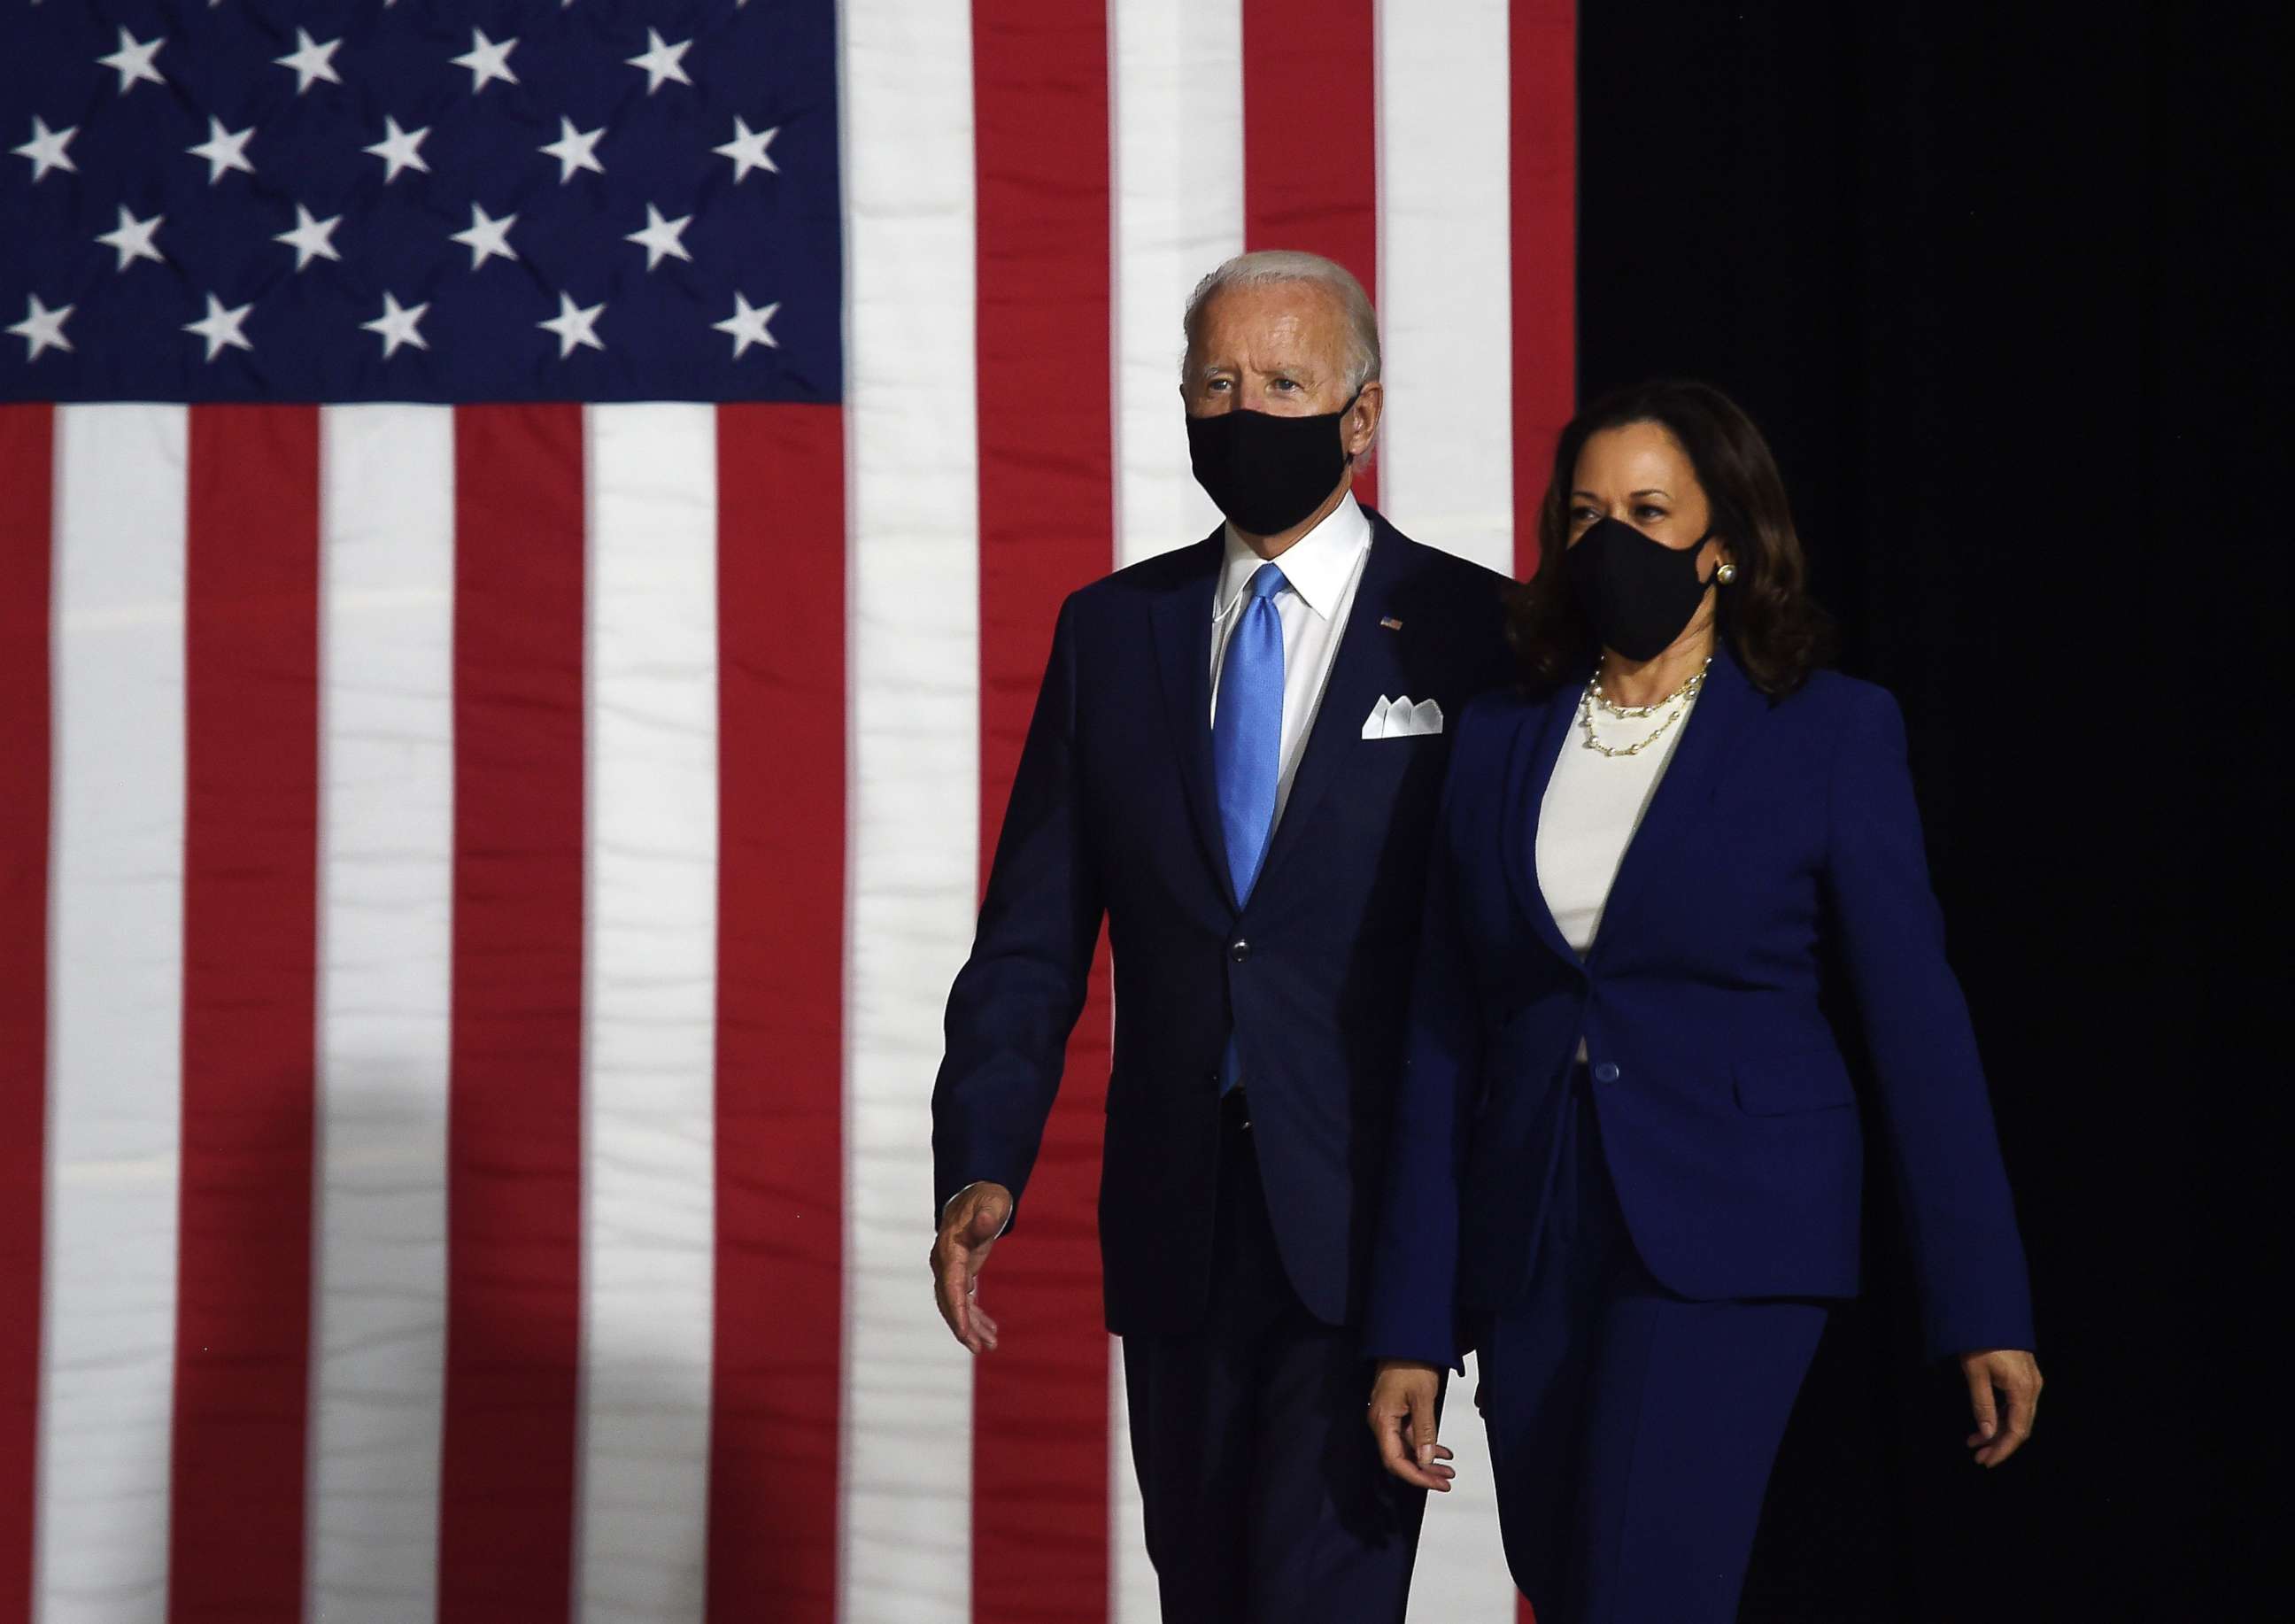 PHOTO: Democratic presidential nominee and former Vice President Joe Biden and vice presidential running mate, Sen. Kamala Harris arrive to conduct their first press conference together in Wilmington, Del. on Aug.12, 2020.